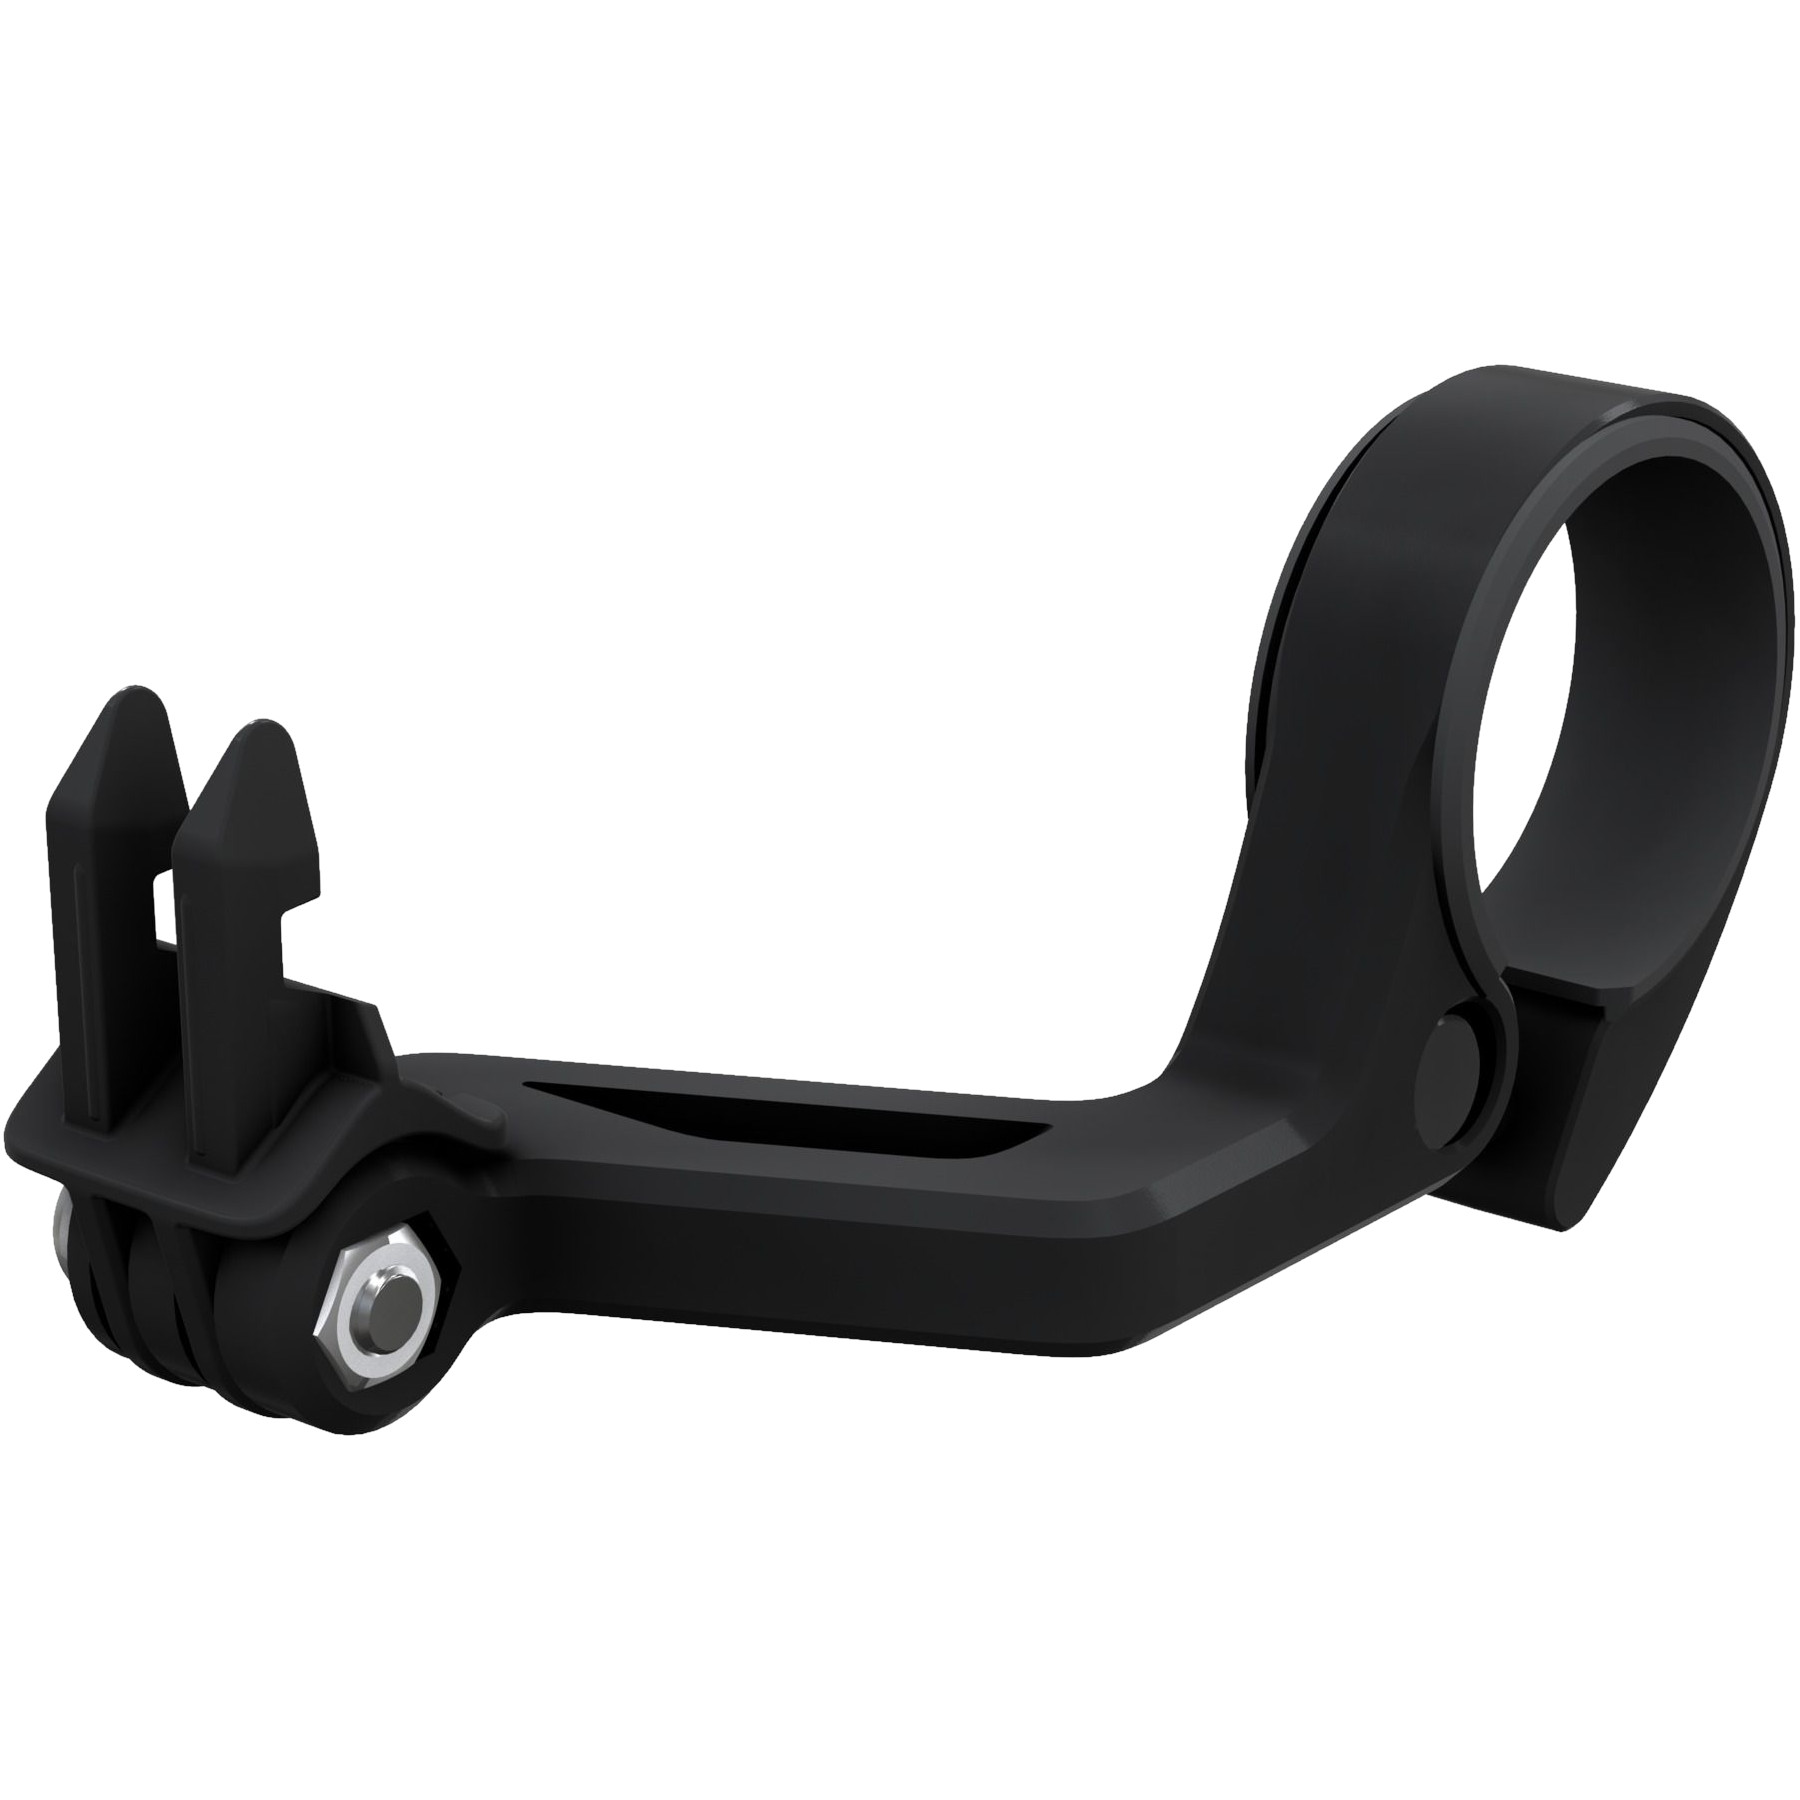 Picture of Syncros Nanaimo Front Light Adapter for Handlebar - black